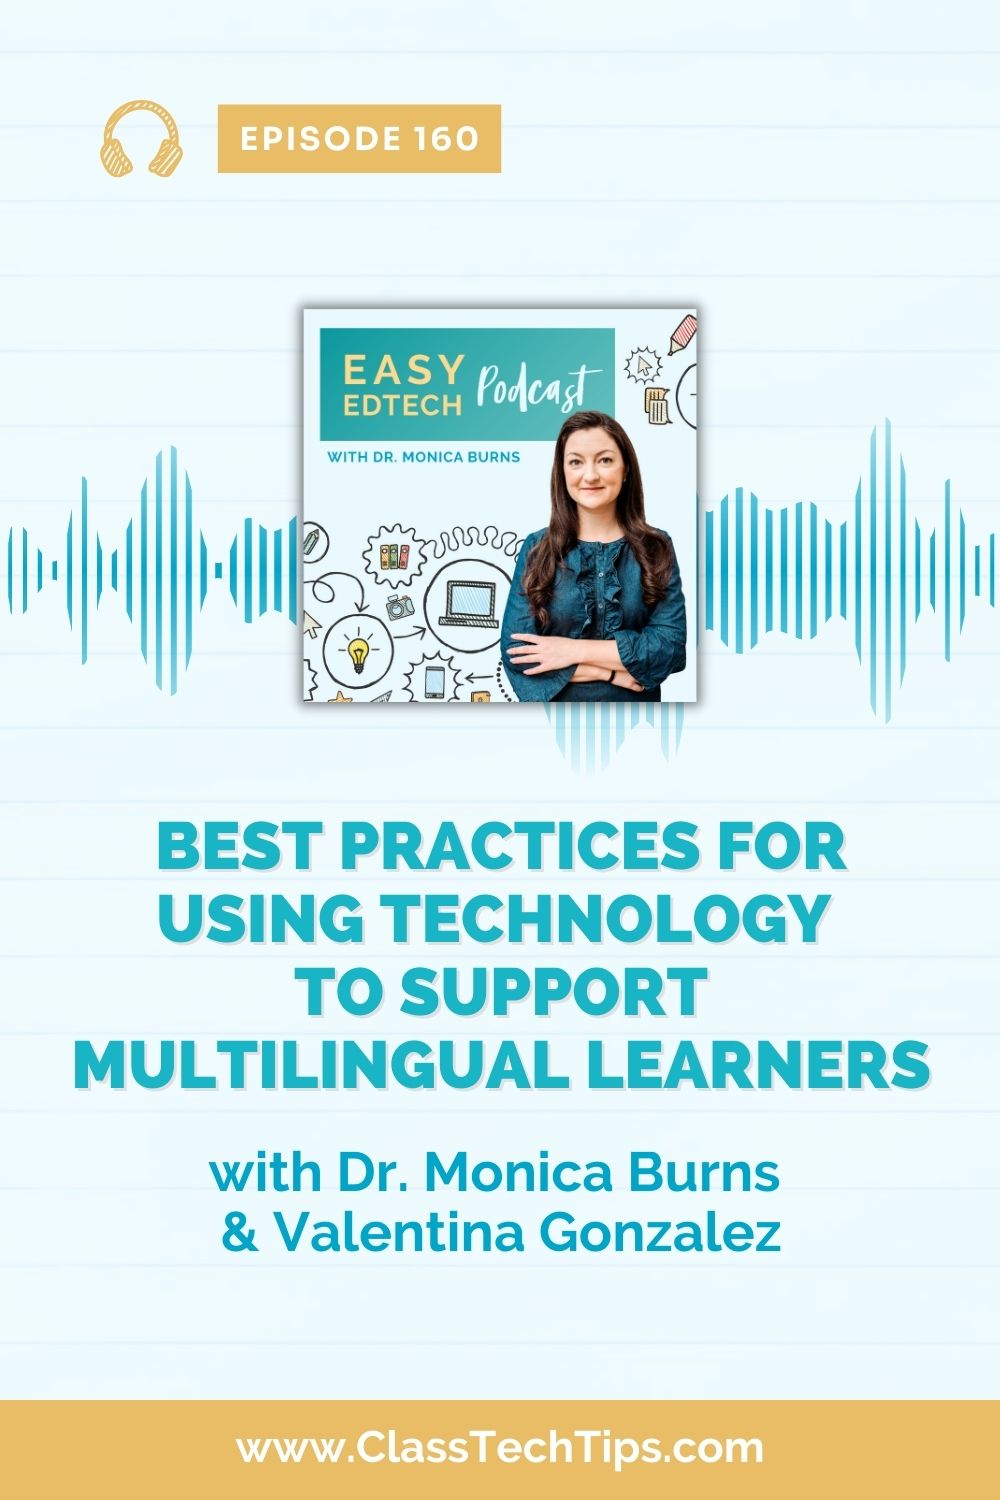 In this episode, author and ESL educational leader, Valentina Gonzalez, joins to discuss best practices for using technology with multilingual learners.